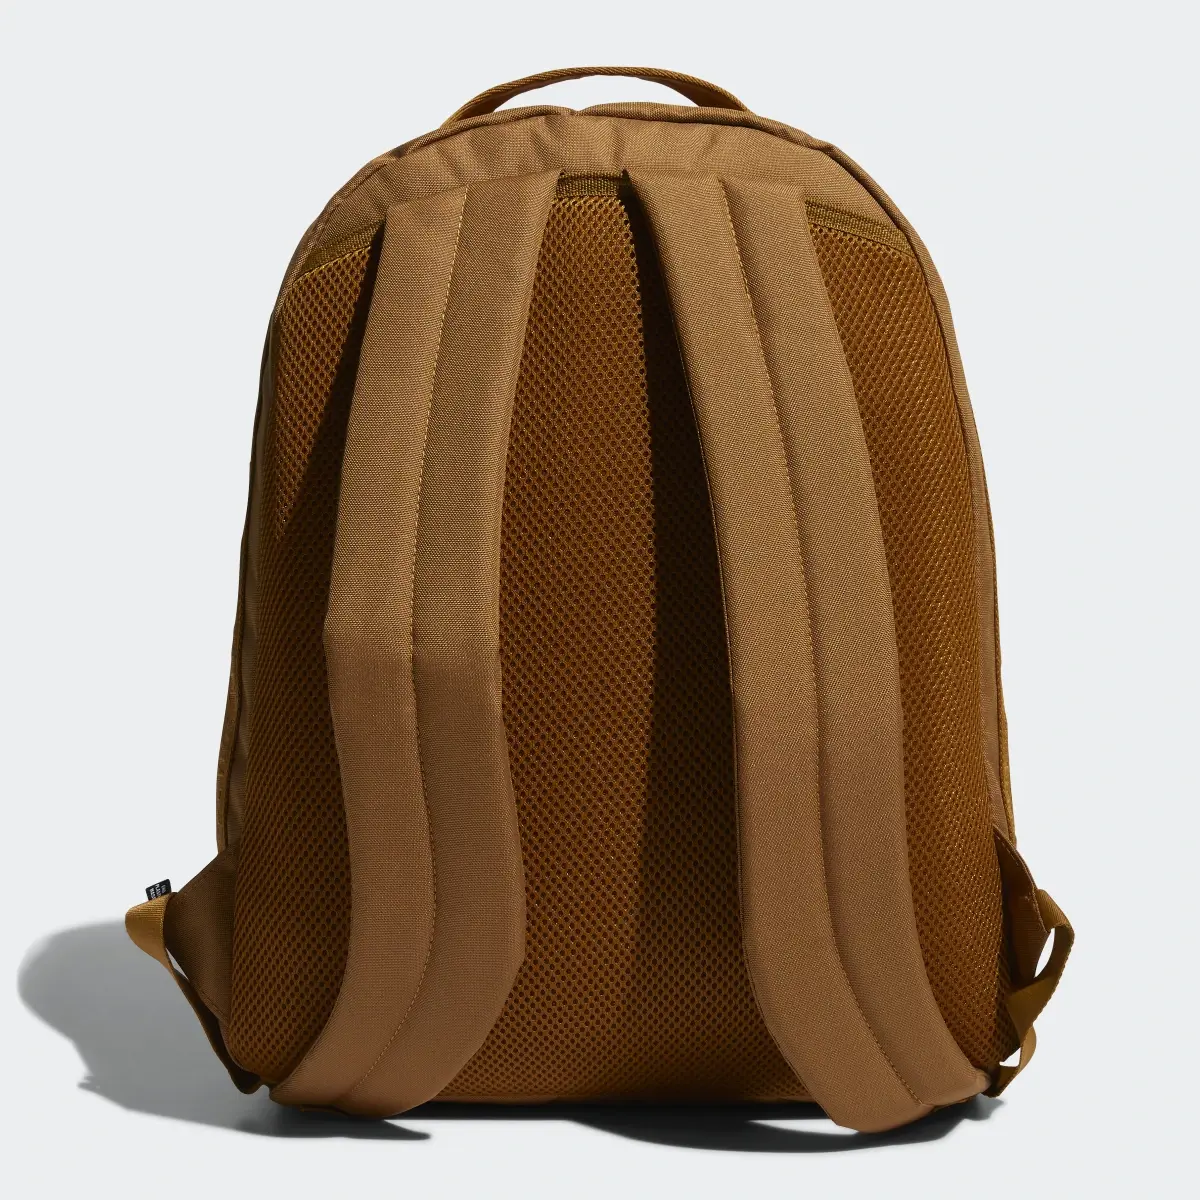 Adidas Must Haves Backpack. 3